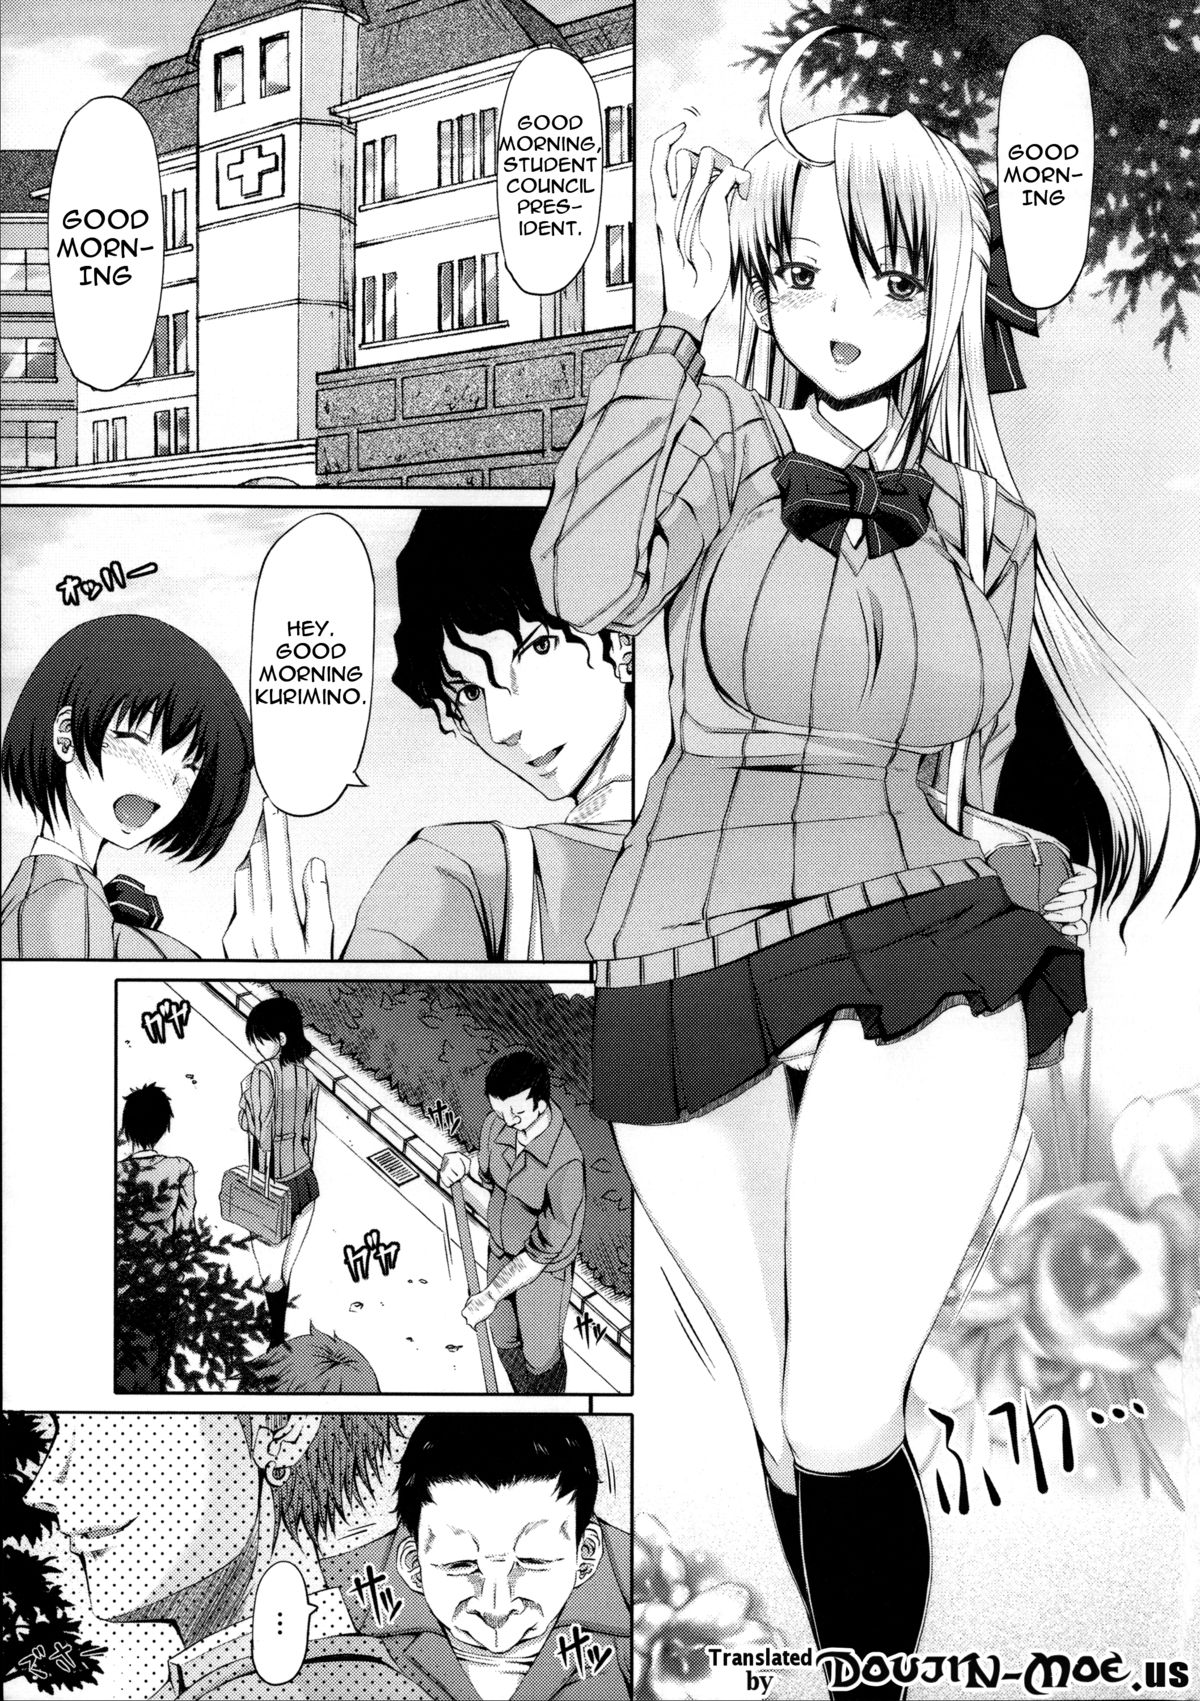 [RED-RUM] LOVE&PEACH Ch. 0-2 [English] {doujin-moe.us} page 26 full